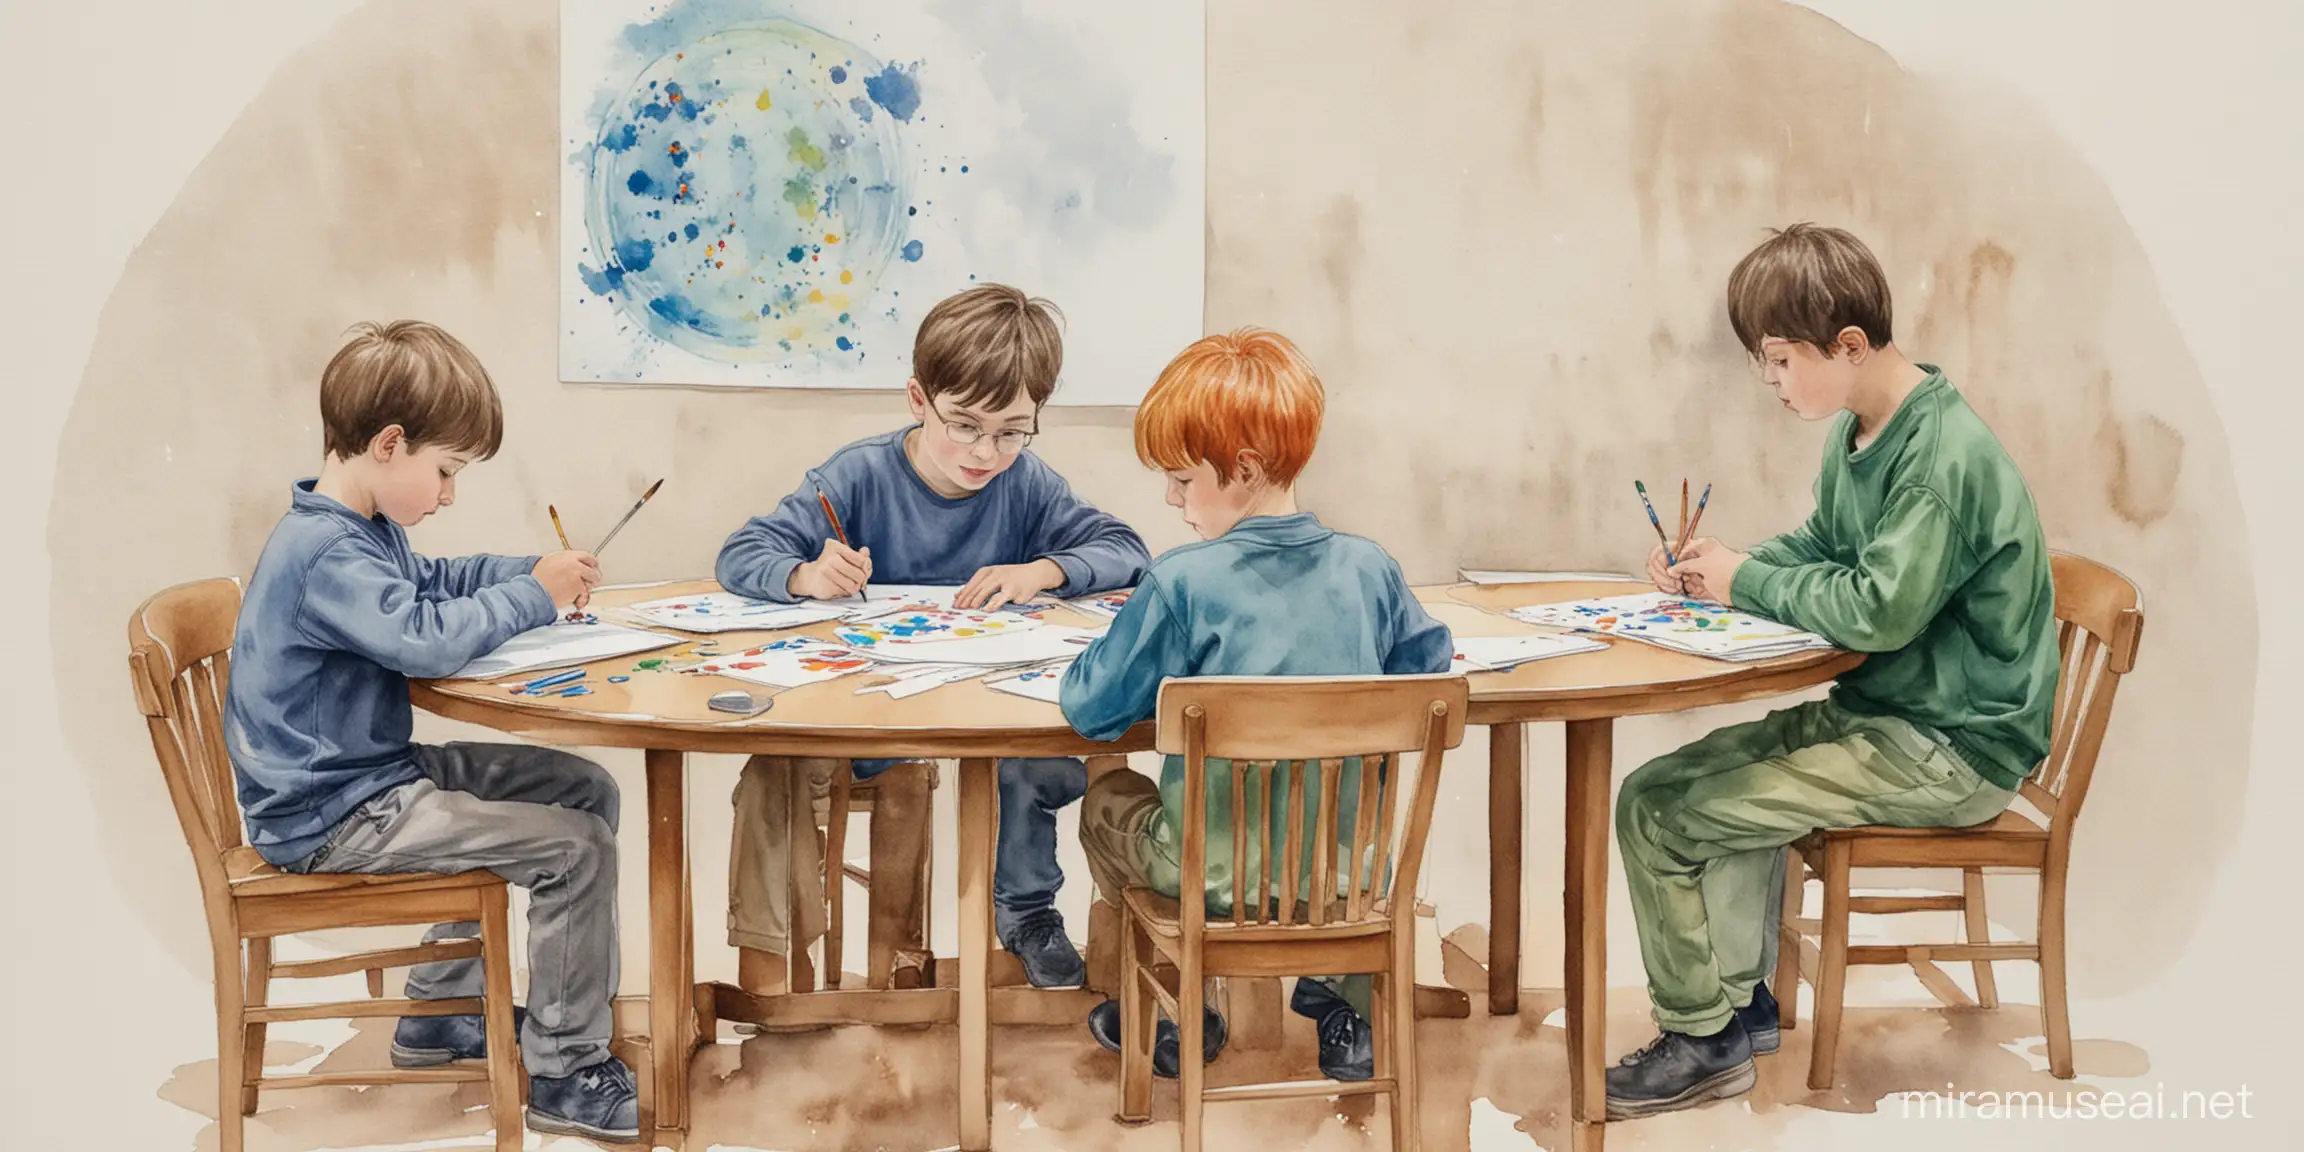 Autistic Boys Painting Together in a Colorful Watercolor Scene